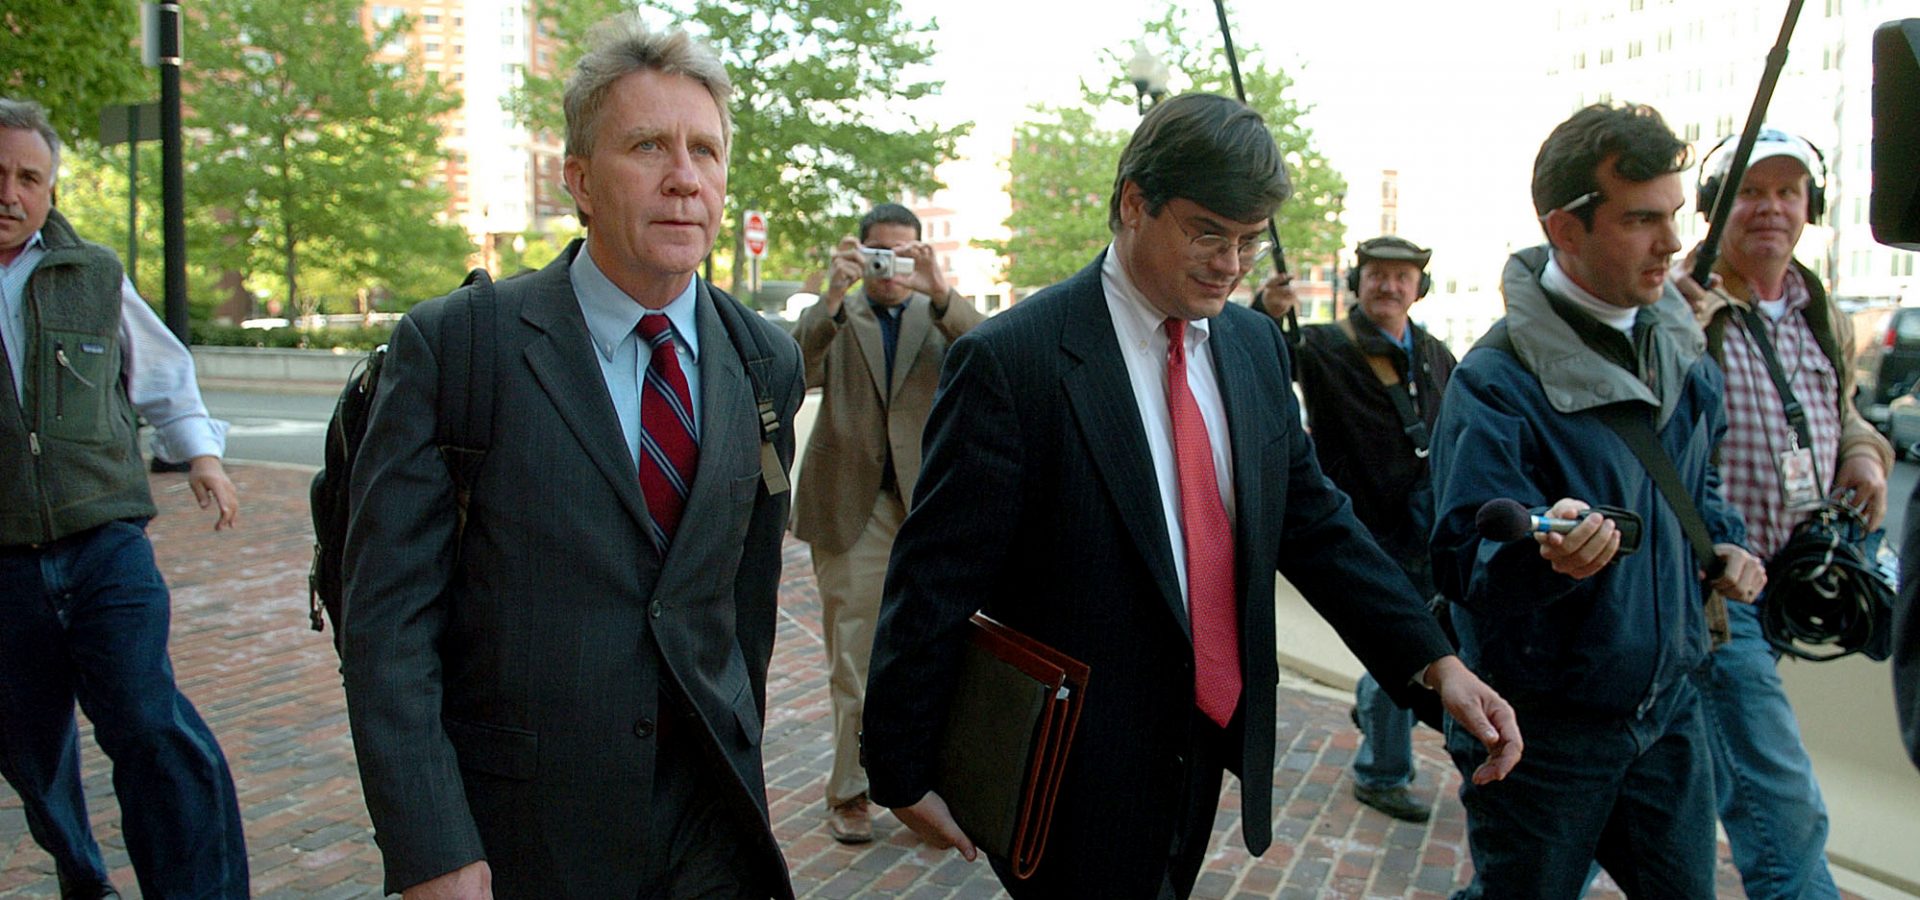 Larry Franklin, of Kearneysville, W.Va., left, leaves the federal courthouse in Alexandria, Va. after a hearing on Wednesday, May 4, 2005. The FBI arrested Franklin, a Pentagon analyst on a charge alleging he passed classified information about potential attacks against U.S. forces in Iraq to employees of a pro-Israel group. (AP/Kevin Wolf)